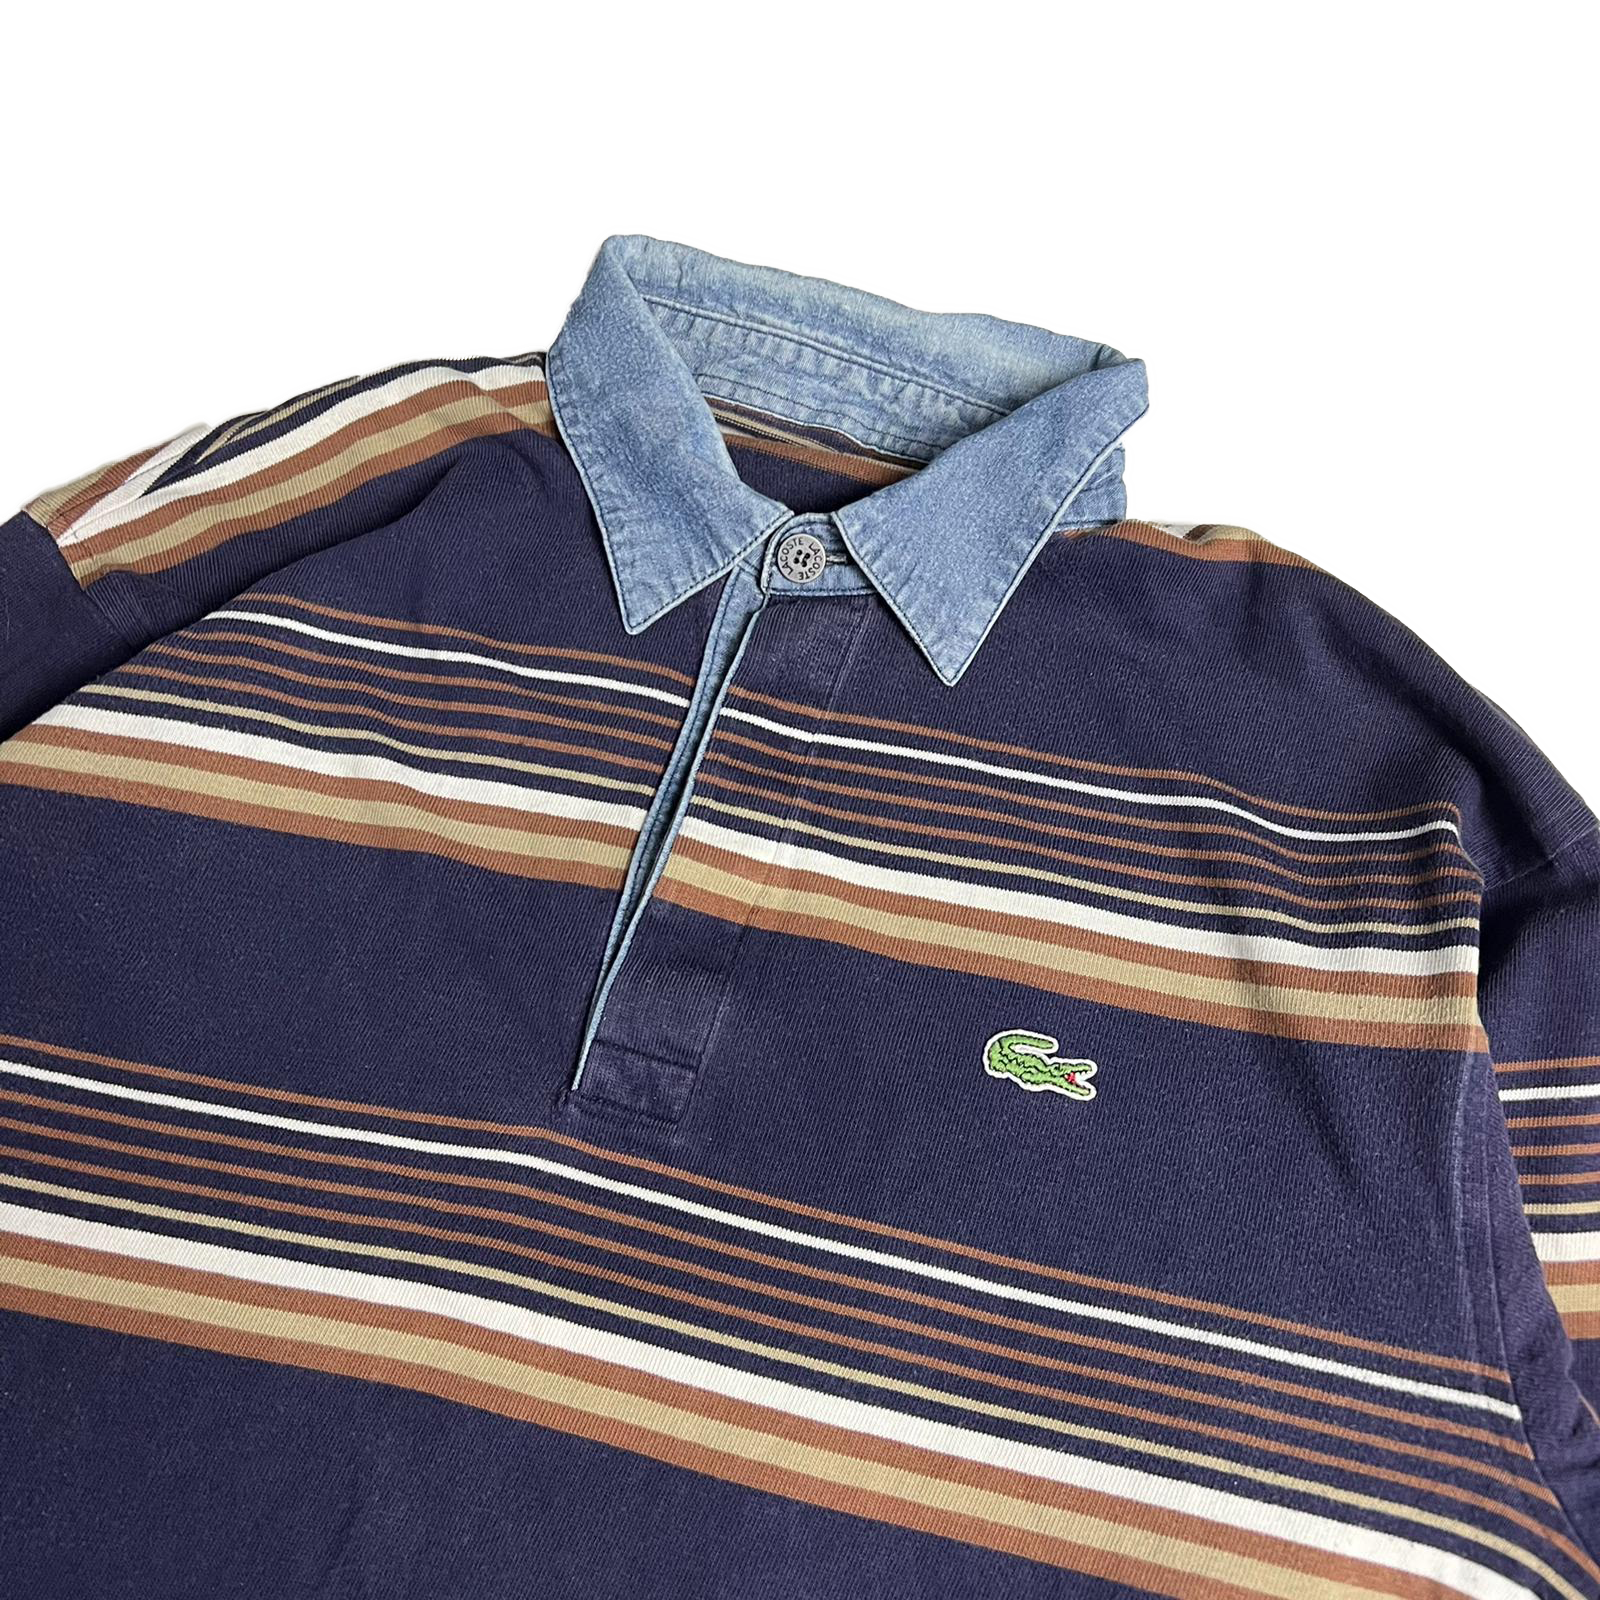 00's Lacoste rugby shirt